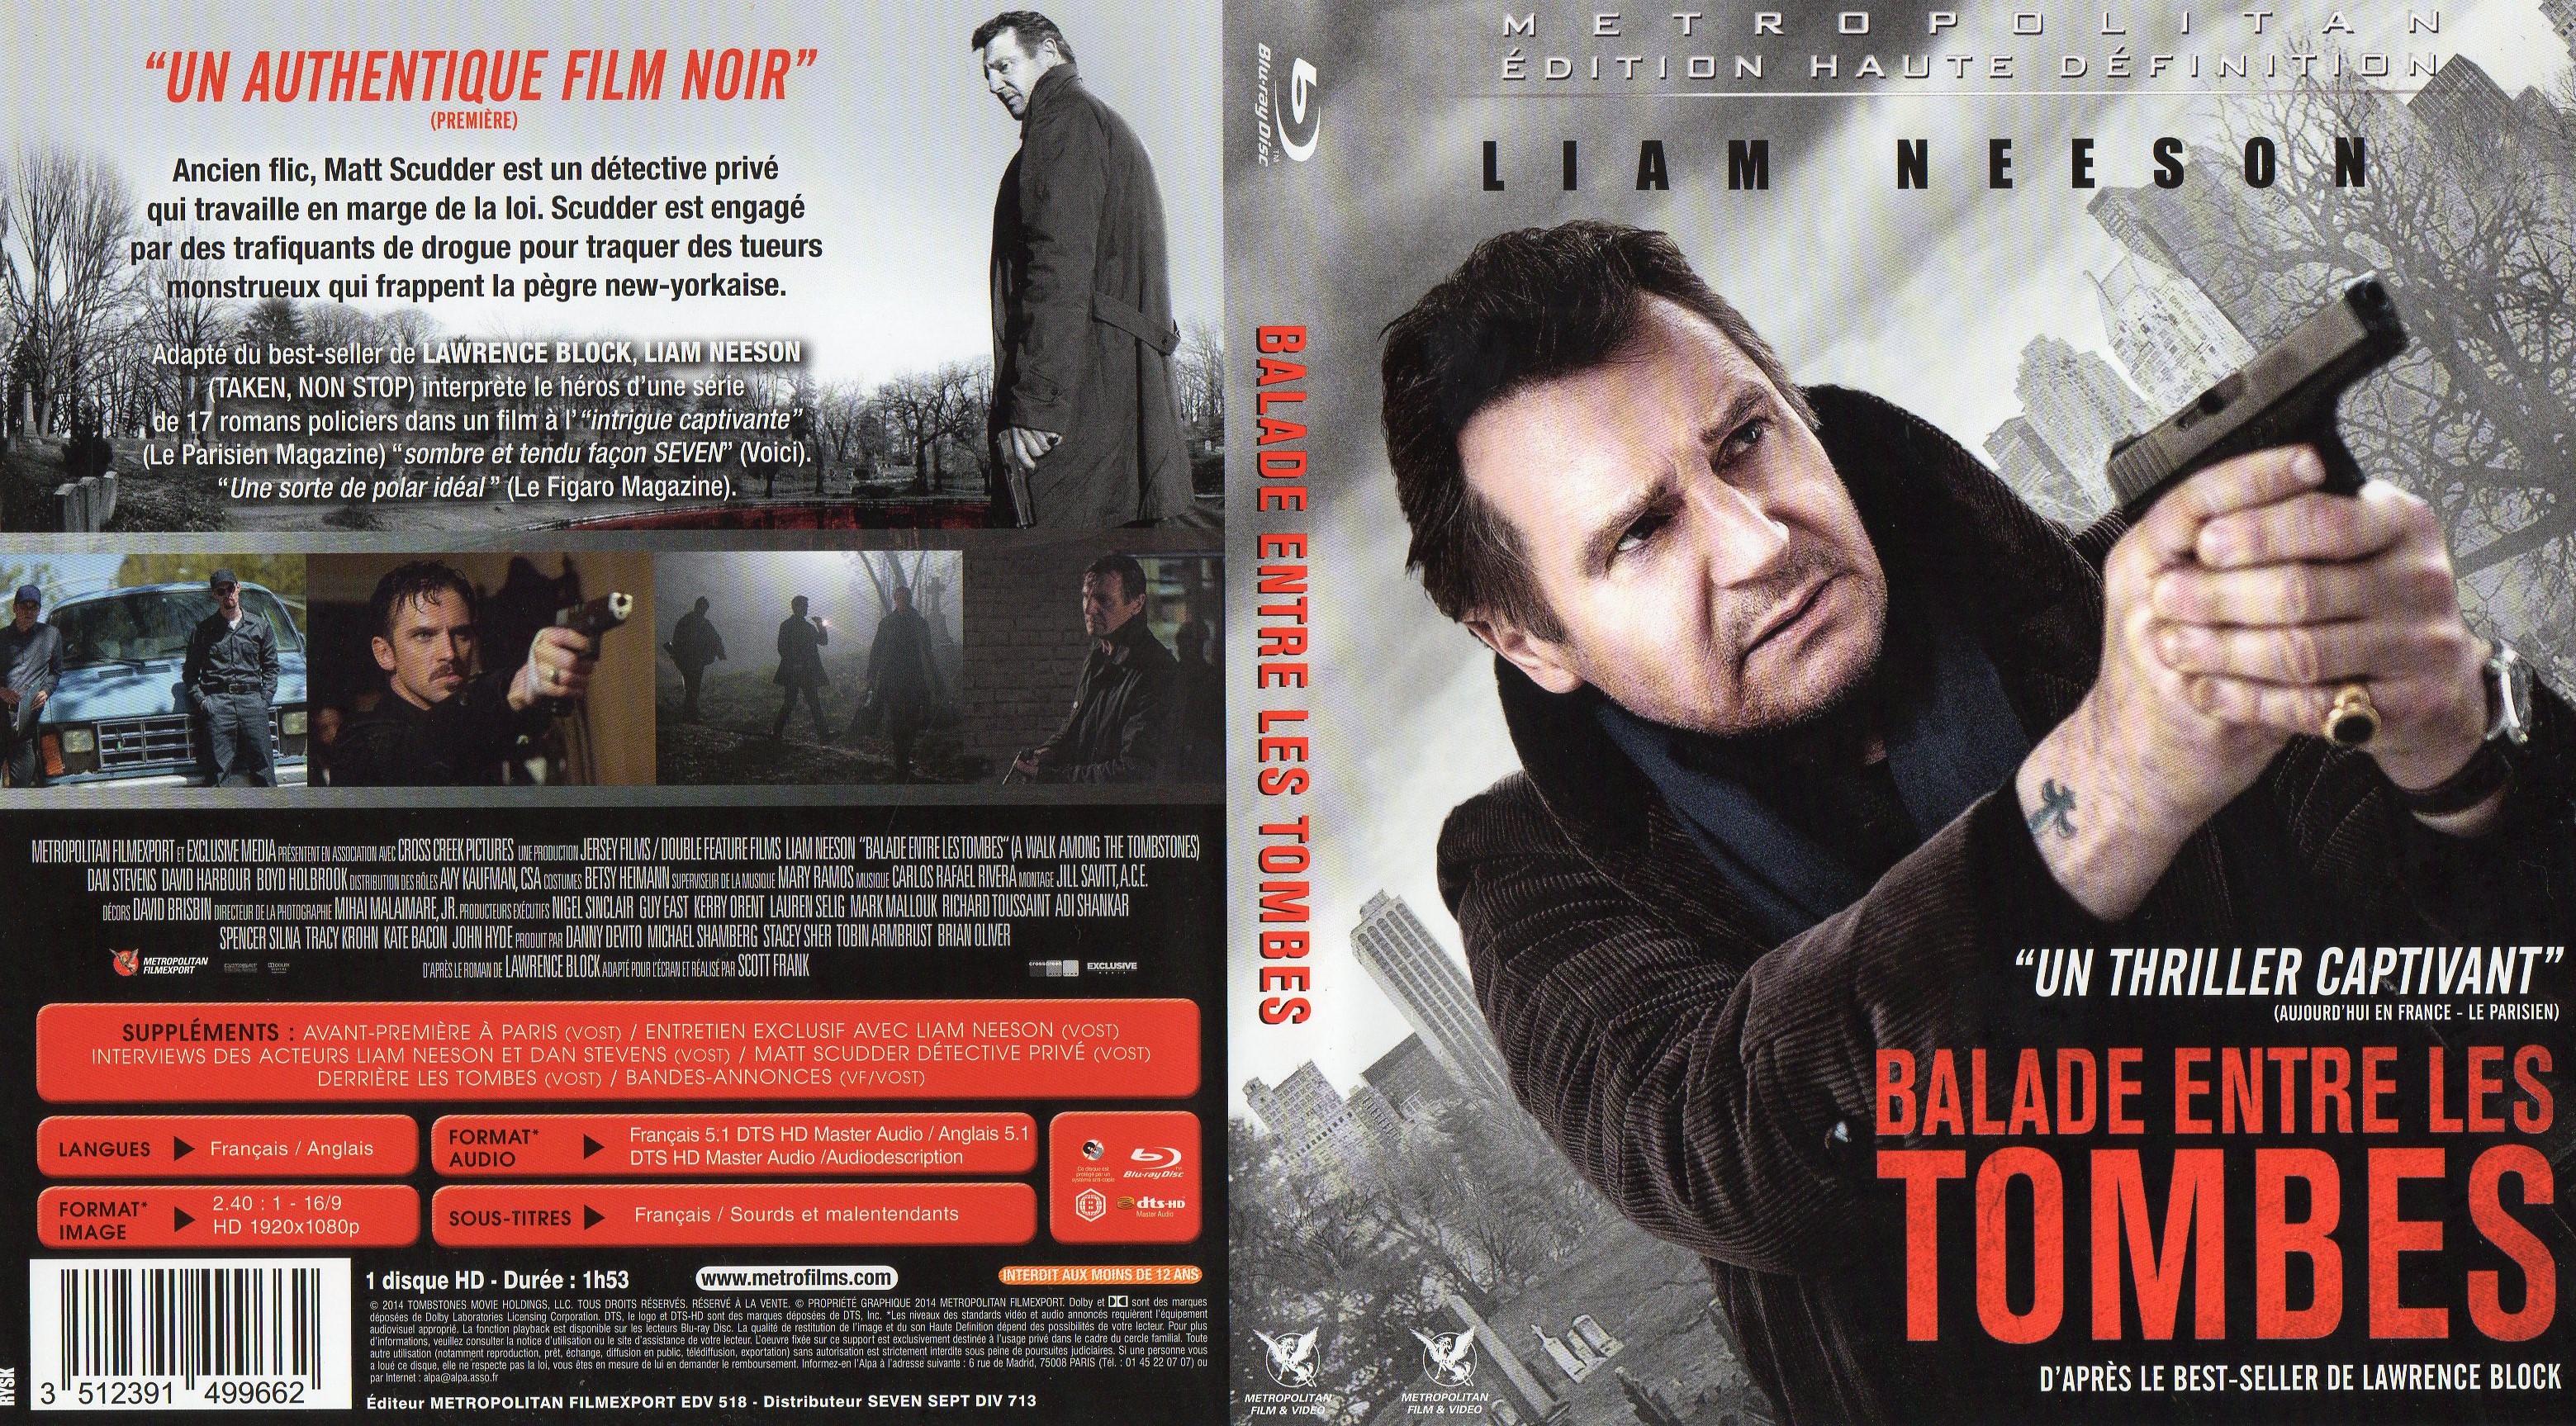 Jaquette DVD Balade entre les tombes (BLU-RAY)